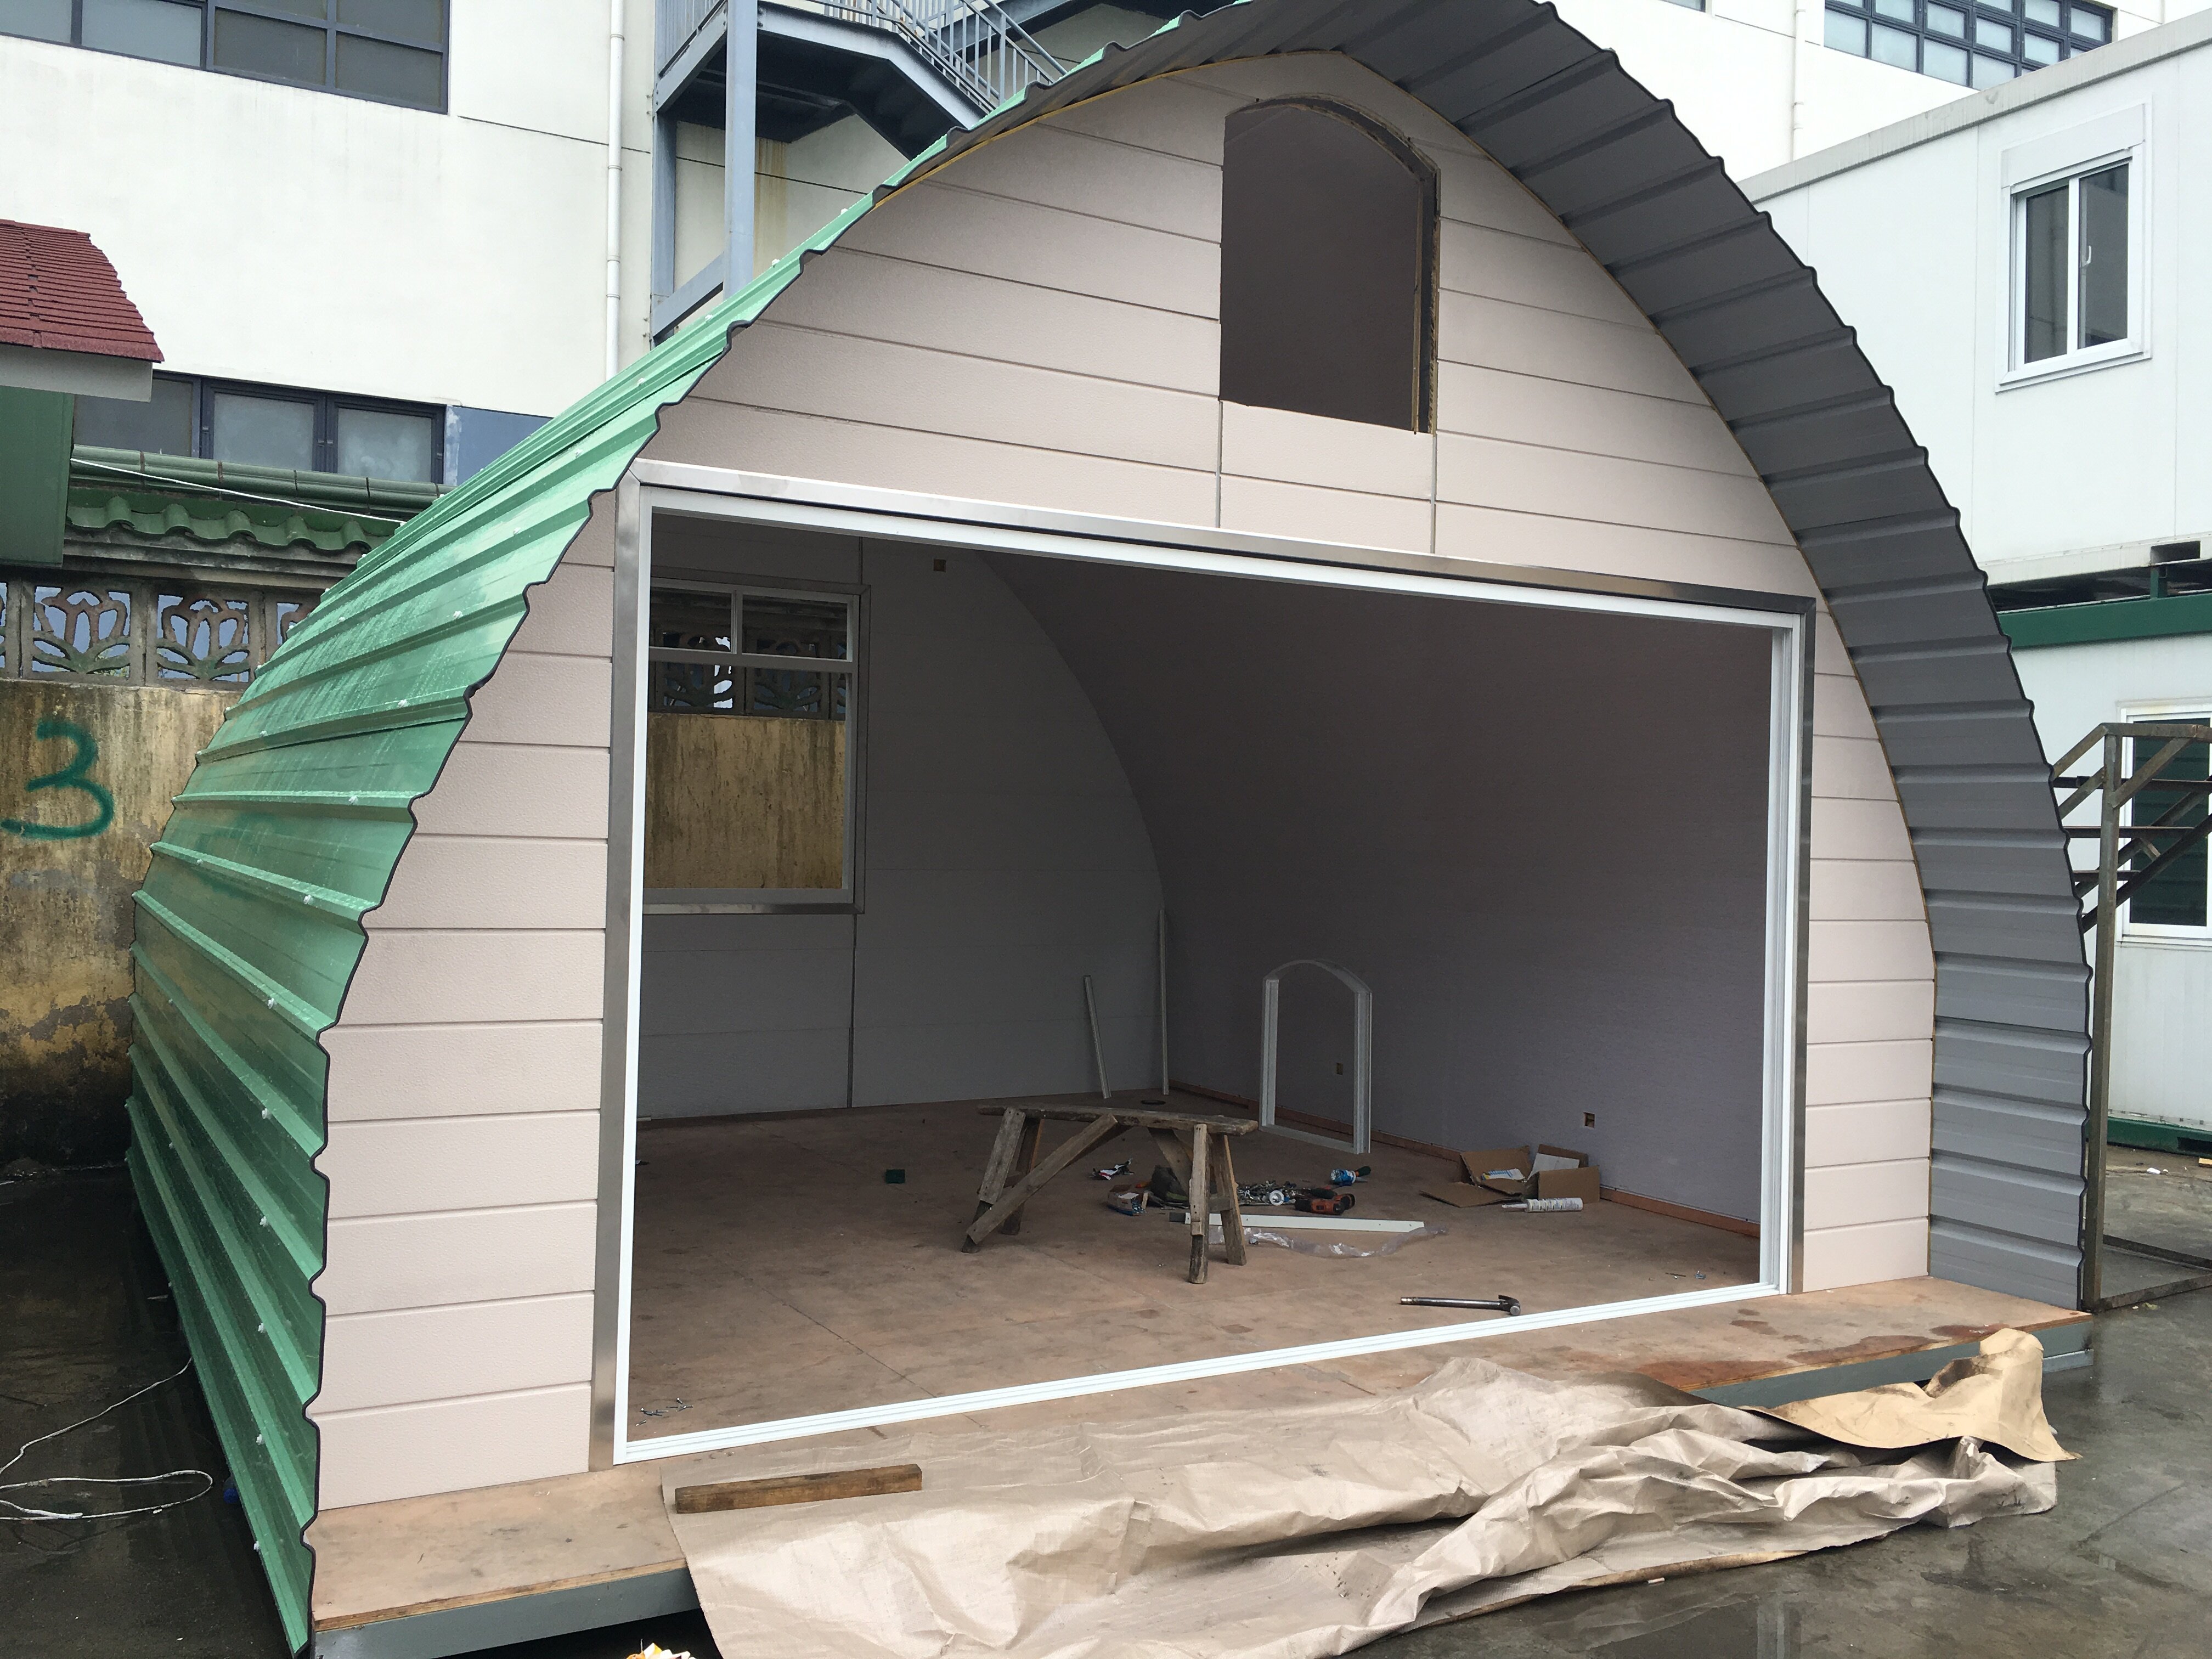 arched tiny house factory, arched tiny house supplier, arched tiny house vendor, arched tiny house export, arched tiny house china